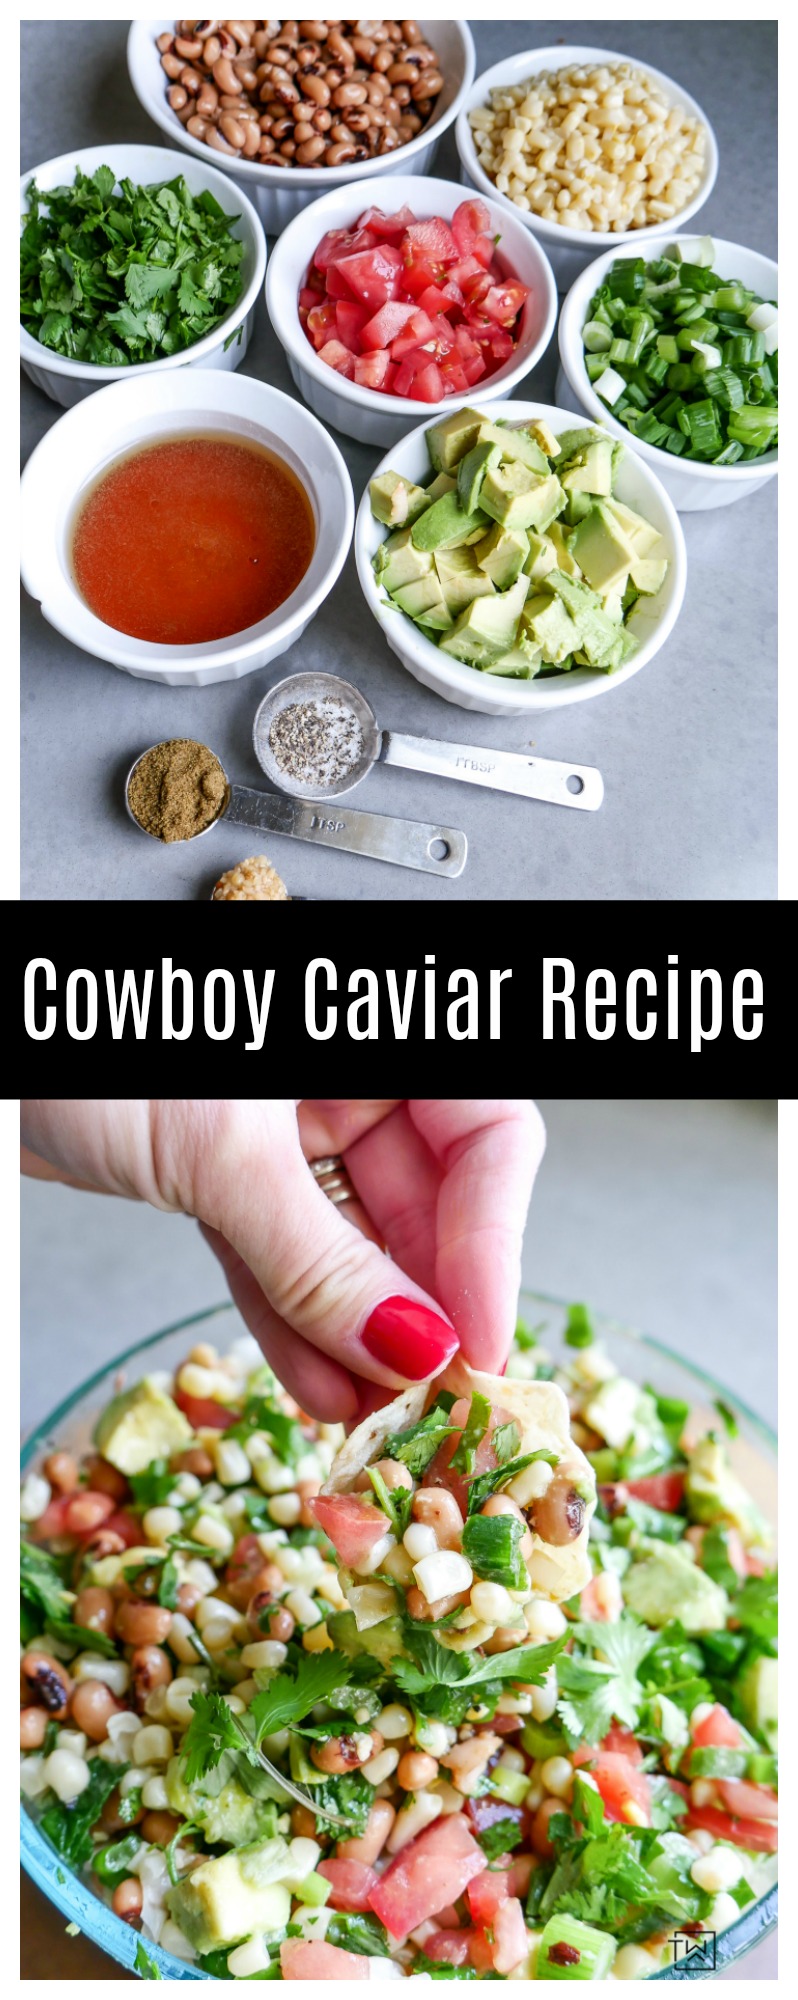 Easy appetizer idea! Whip up this quick Cowboy Caviar Dip Recipe for your next party. It's full of fresh flavors. 